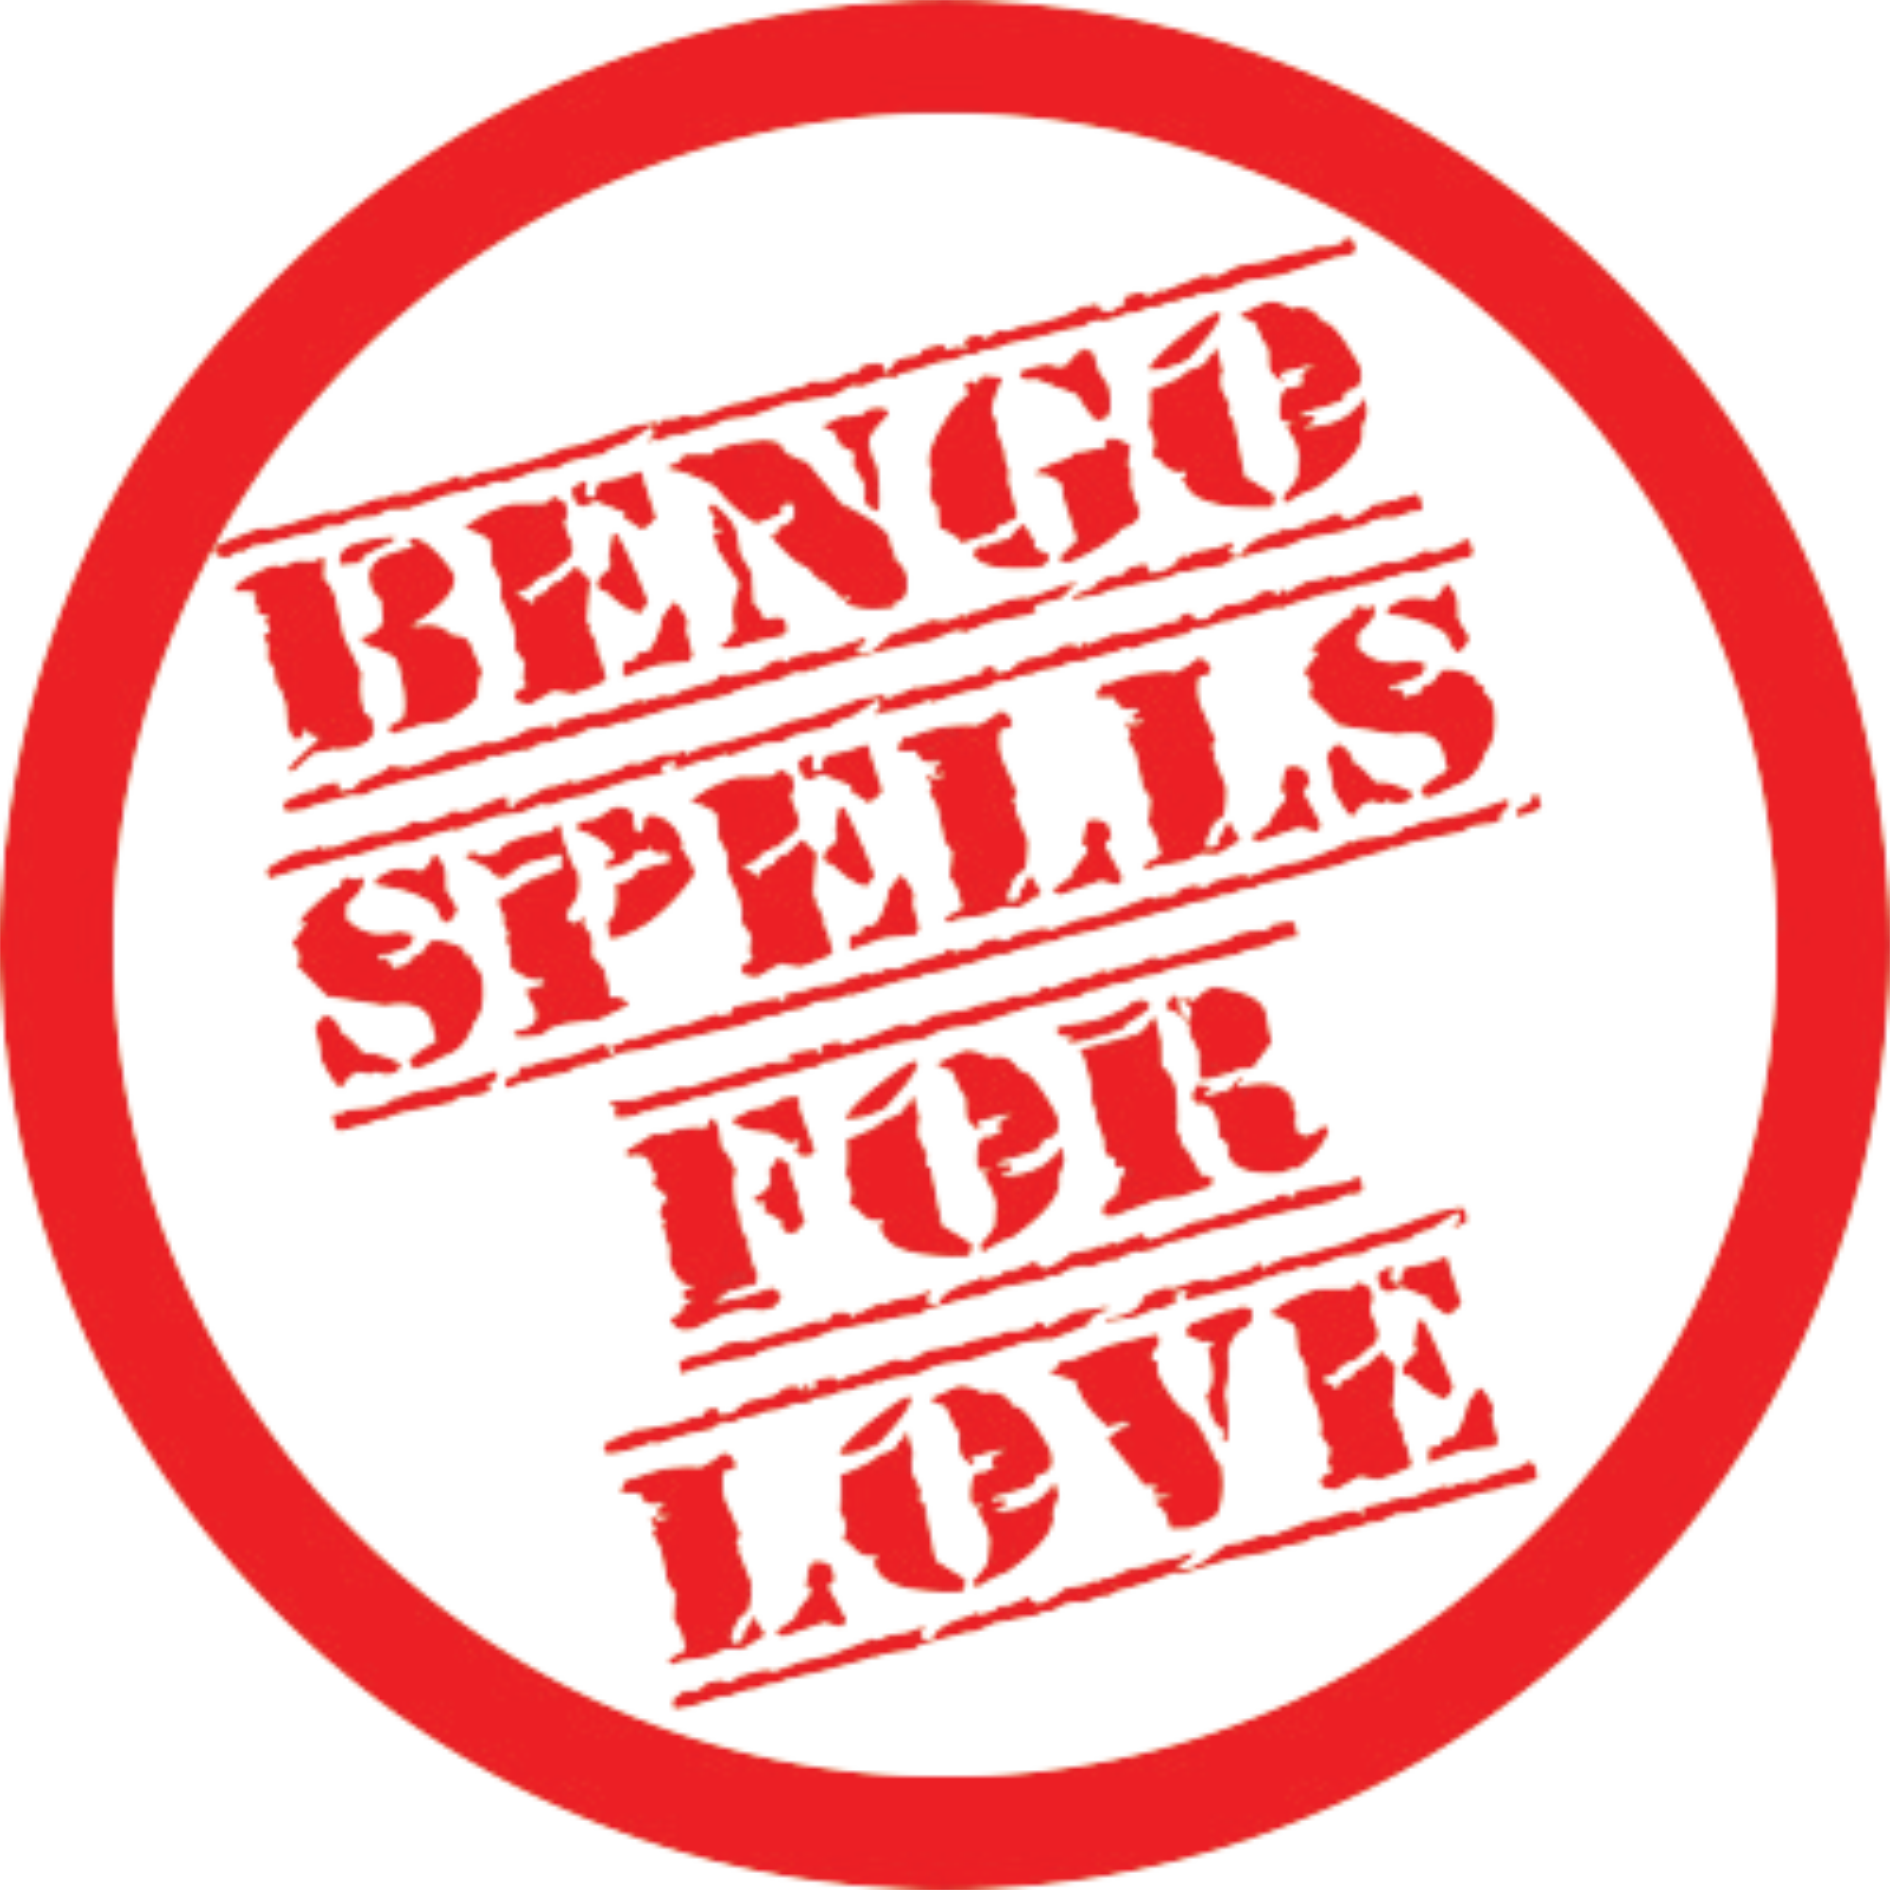 Am Prof Bengo a traditional healer and sangoma who has been practicing for over 30 years. I can help you with your life challenges affecting you daily.